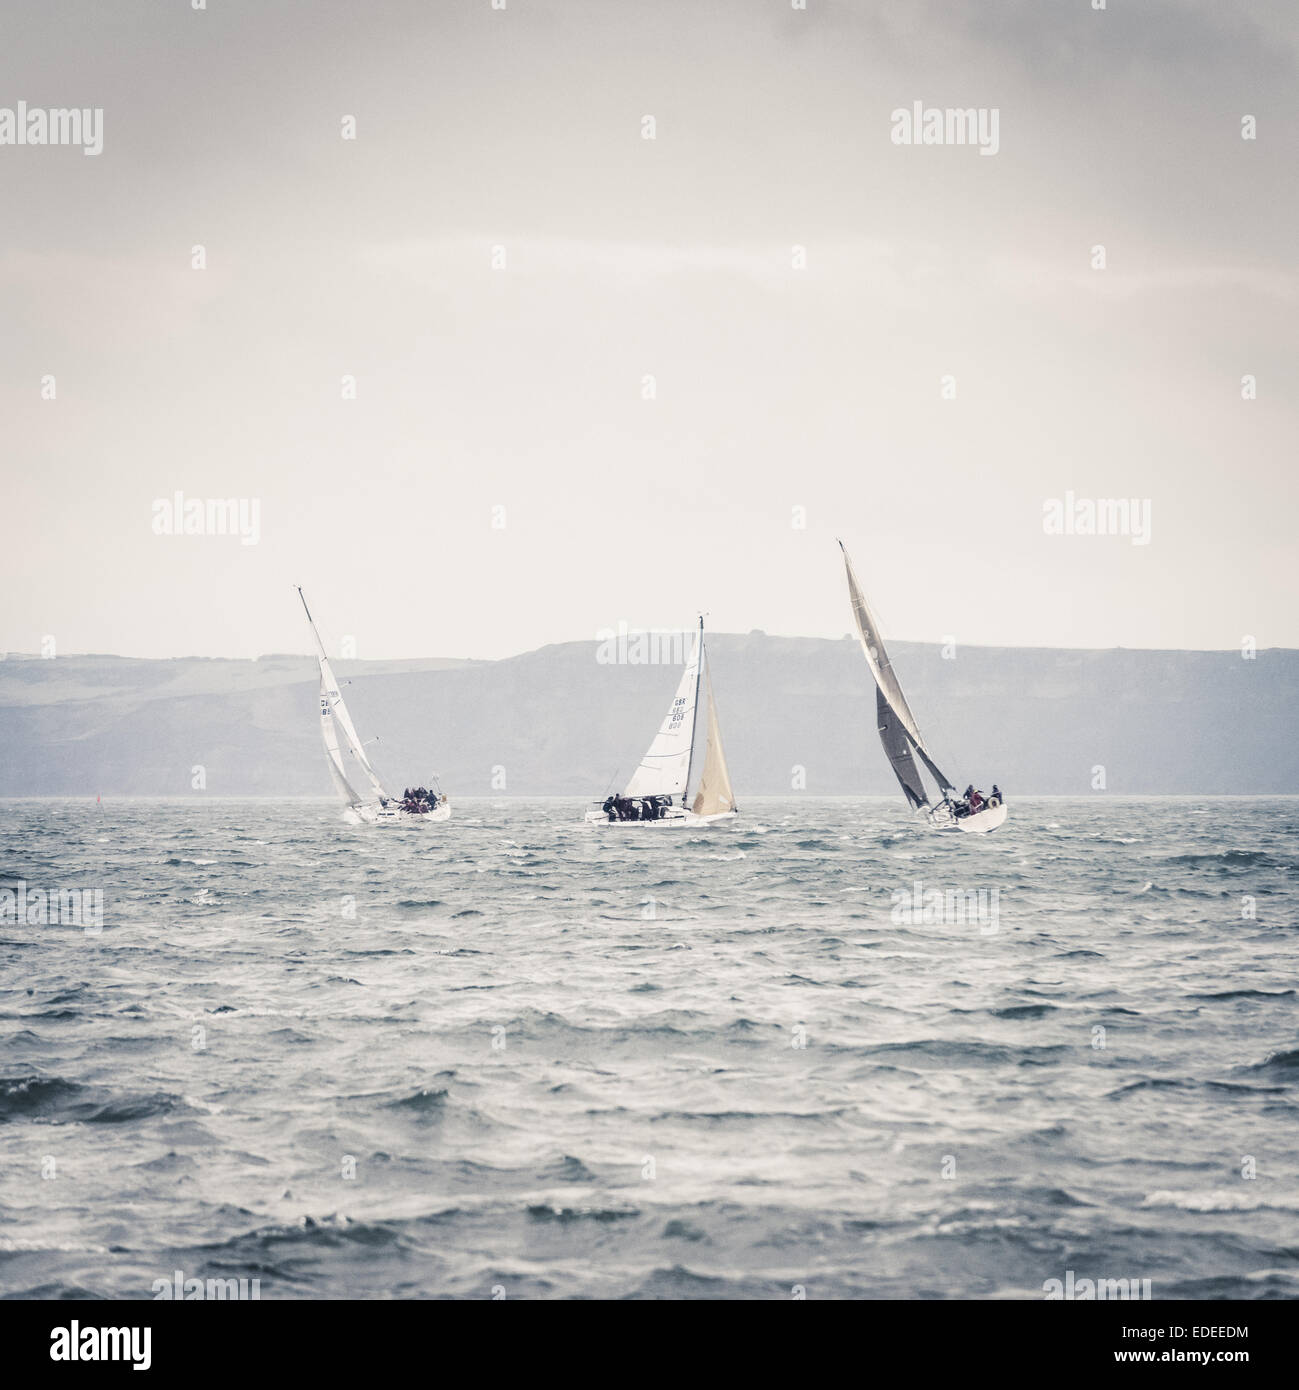 Sailing boats in North Sea, Scarborough, North Yorkshire, UK. Stock Photo